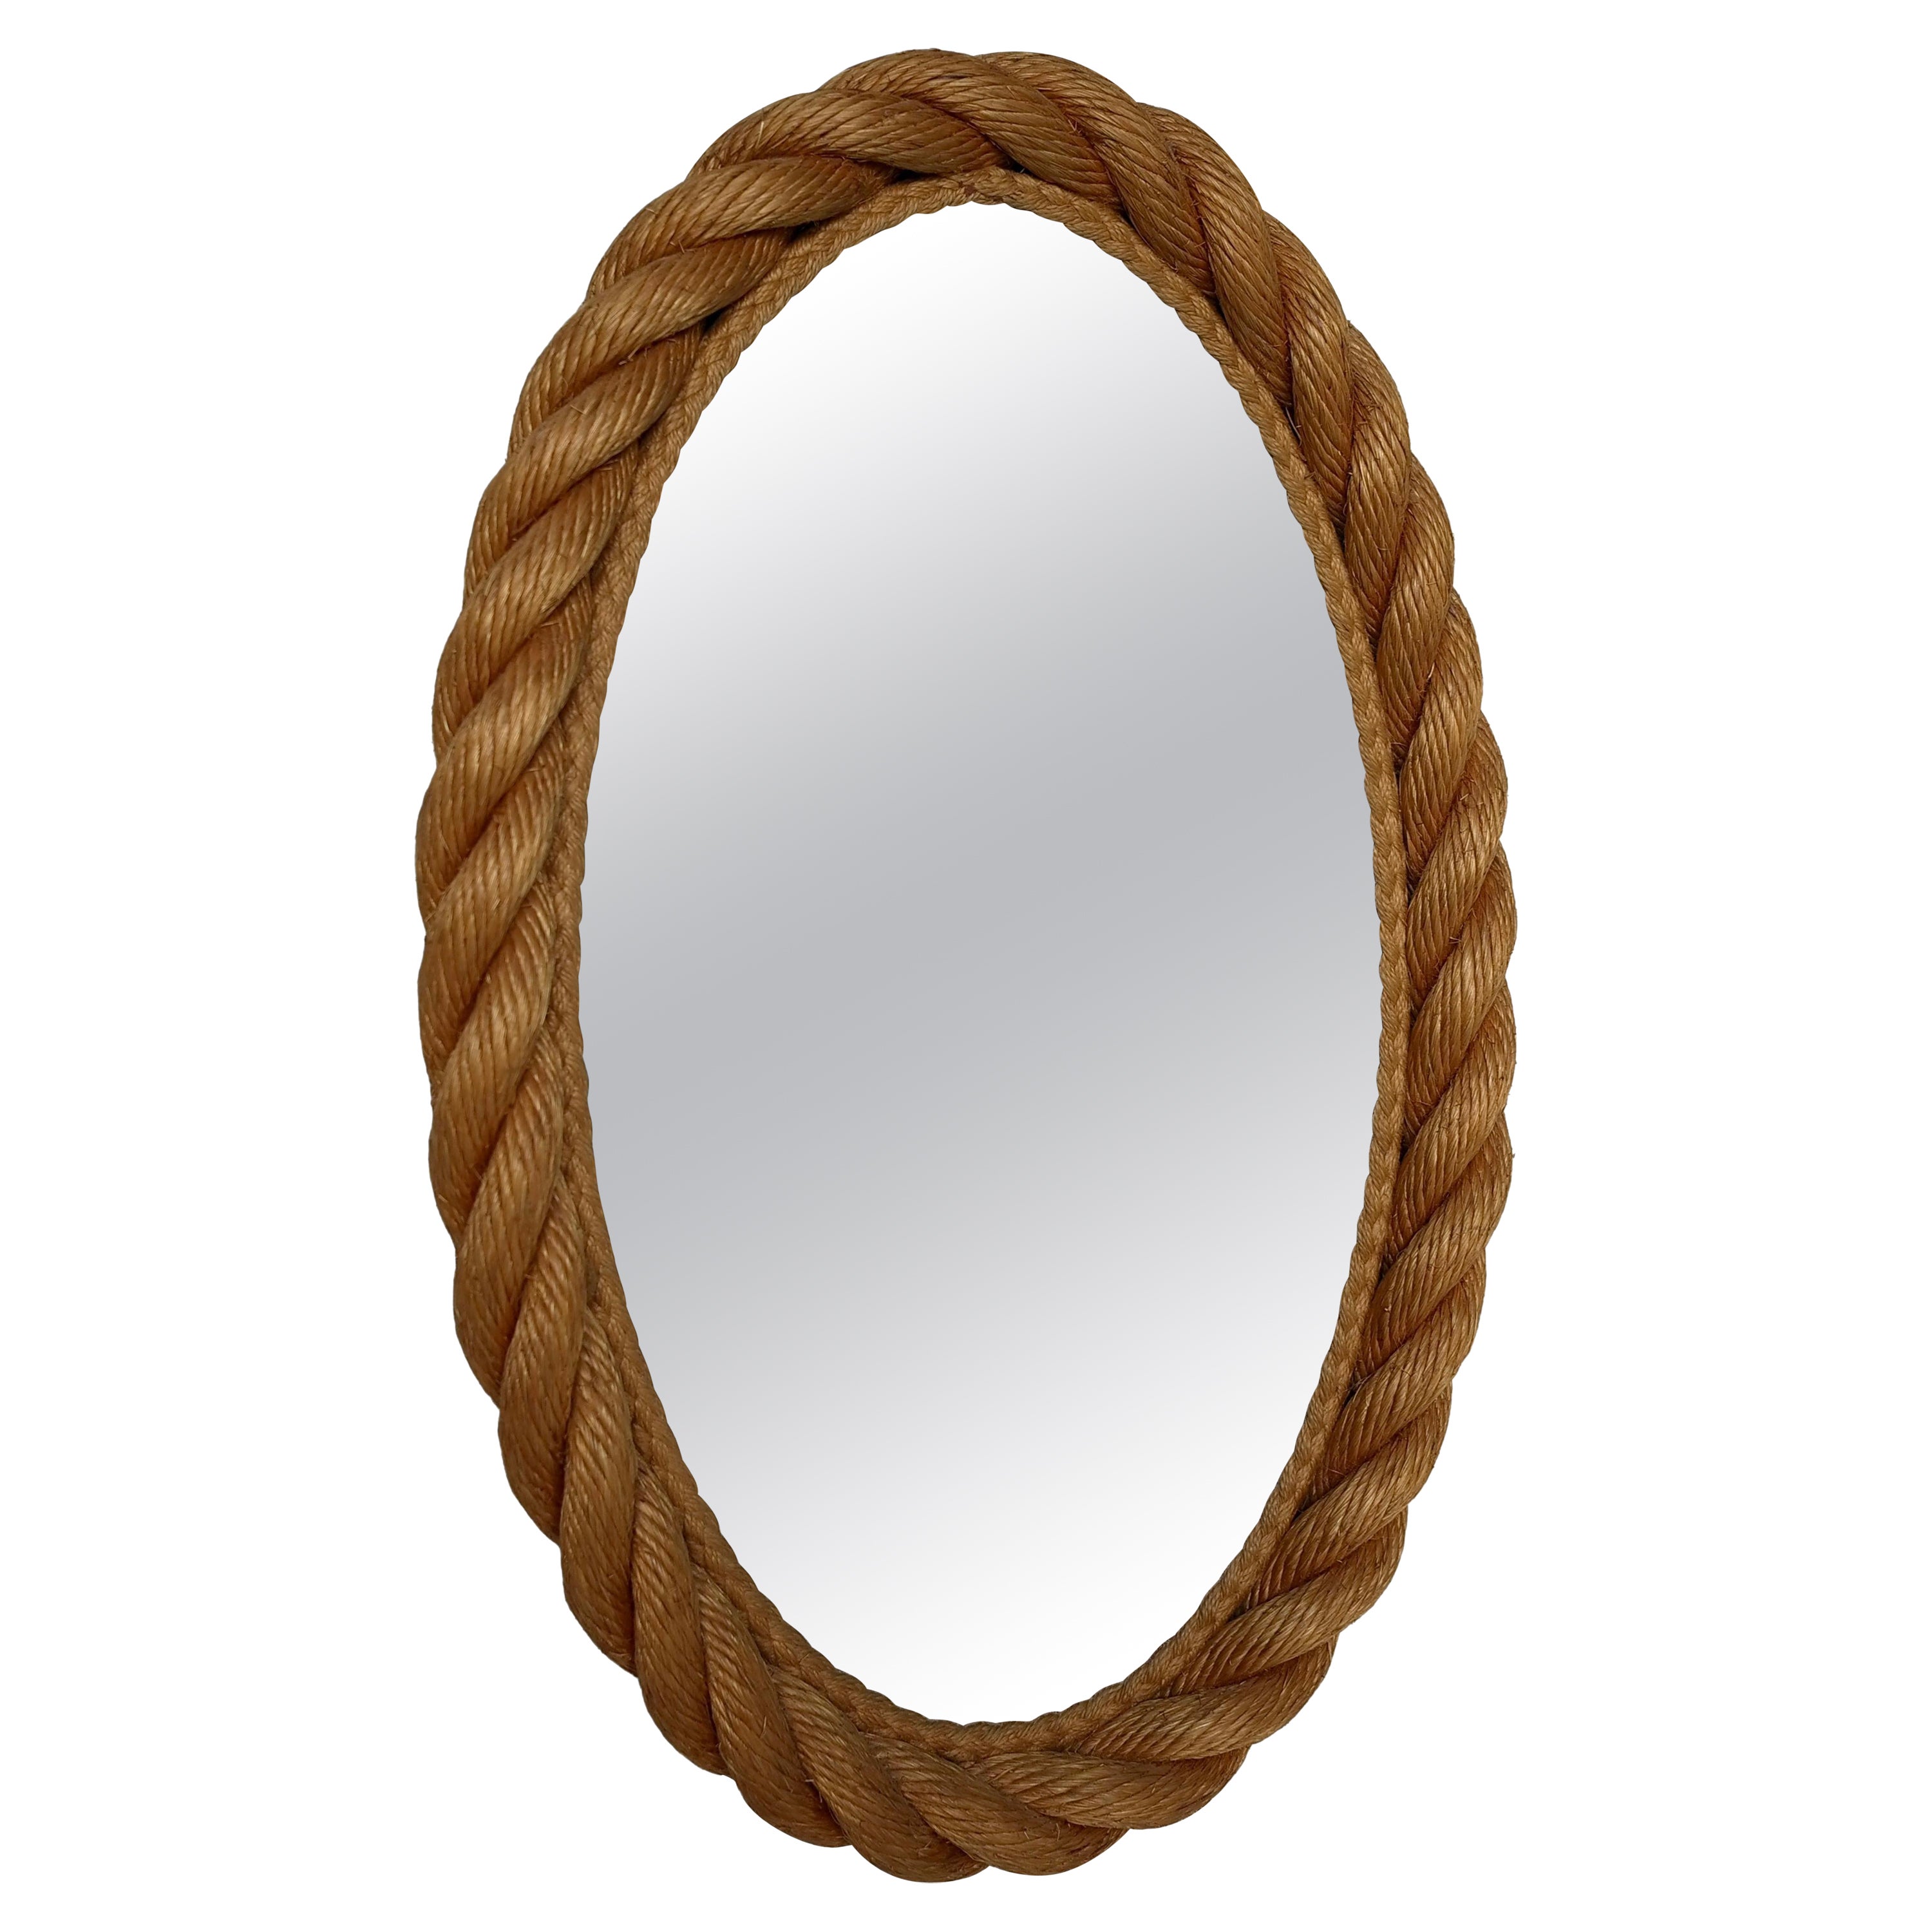 Oval Rope Mirror by Adrien Audoux and Frida Minet, France, 1950s For Sale